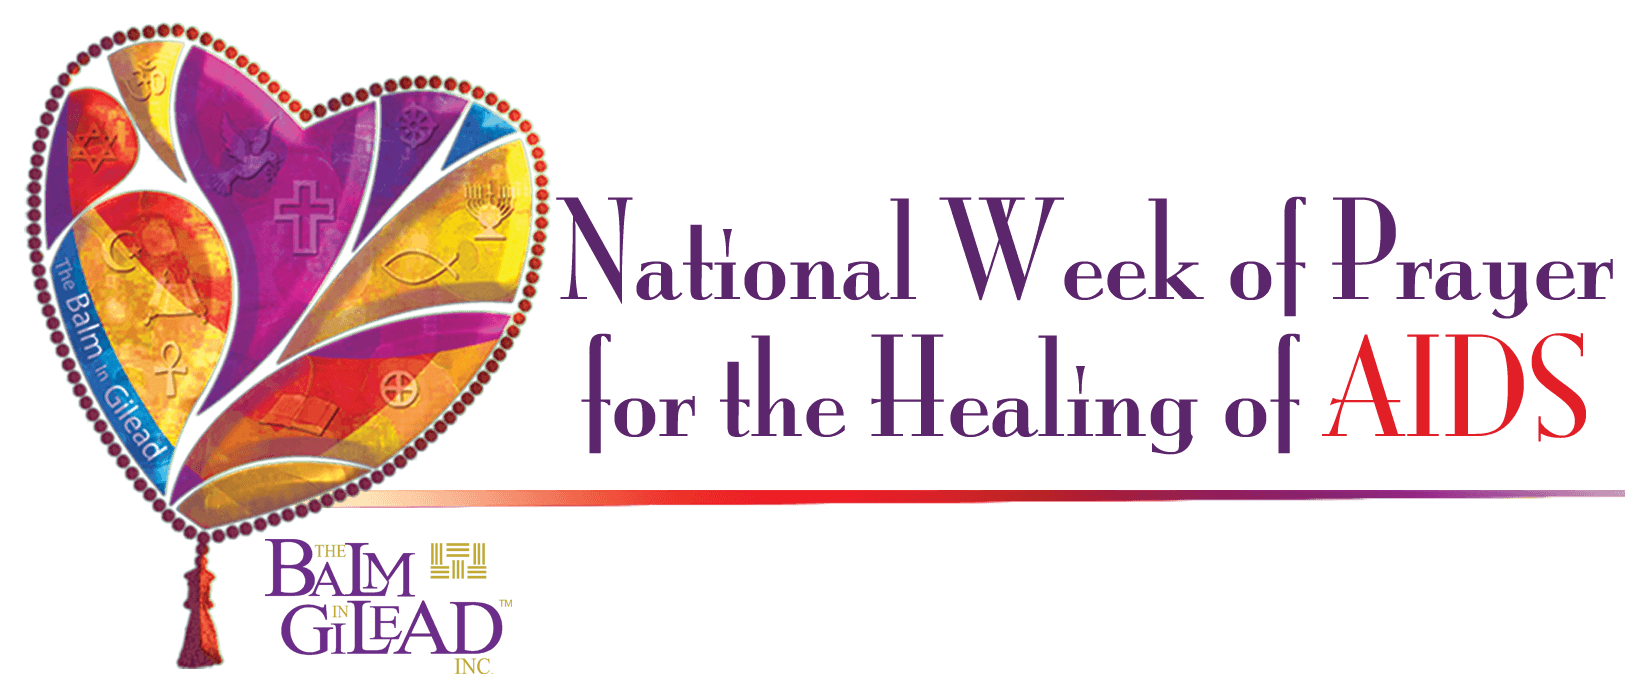 2015 National Day of Prayer Logo - NWPHA – National Week of Prayer for the Healing of AIDS